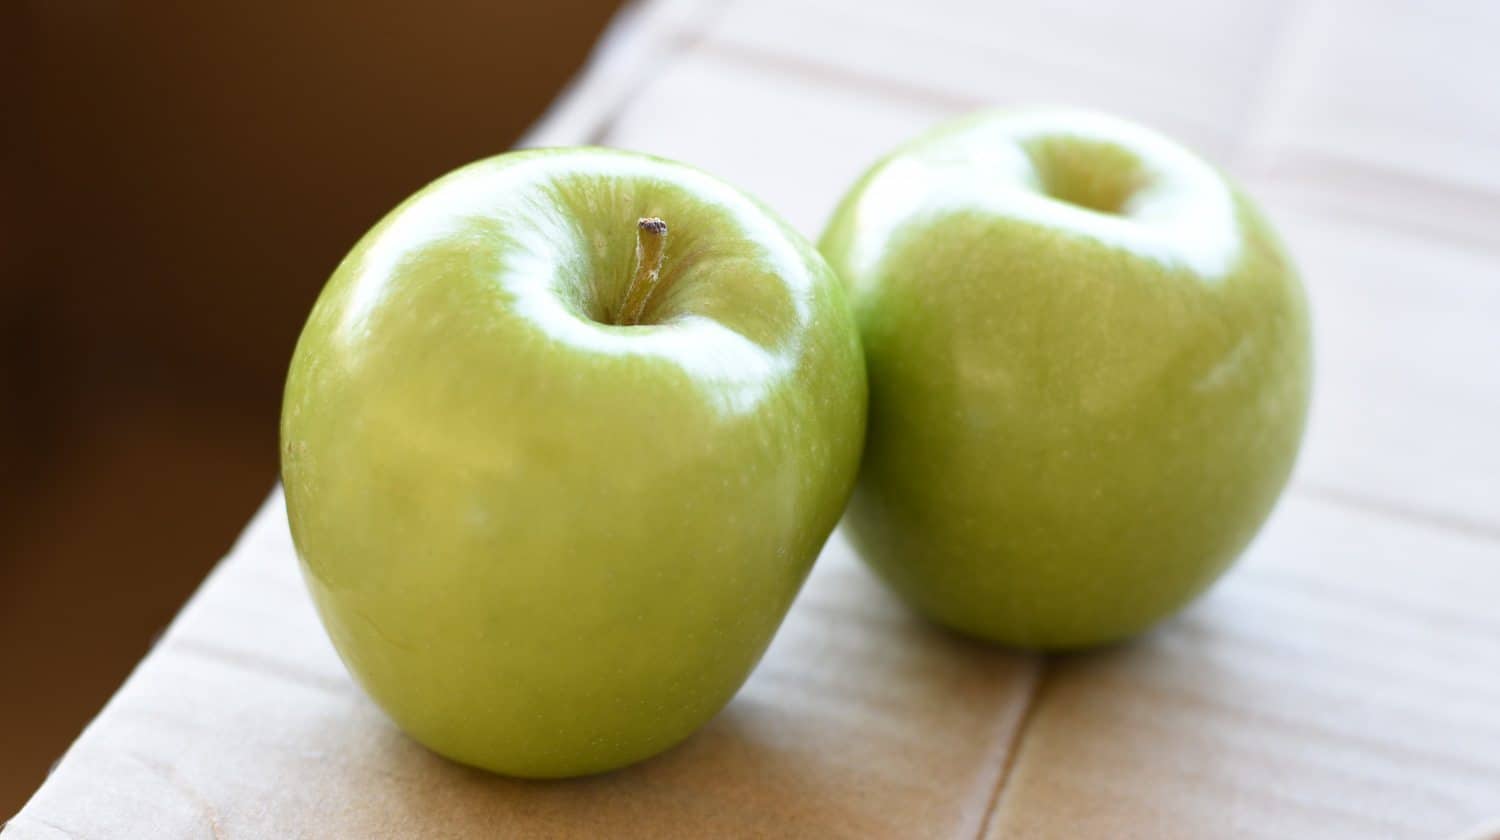 granny-smith-apples-from-walmart-online-grocery